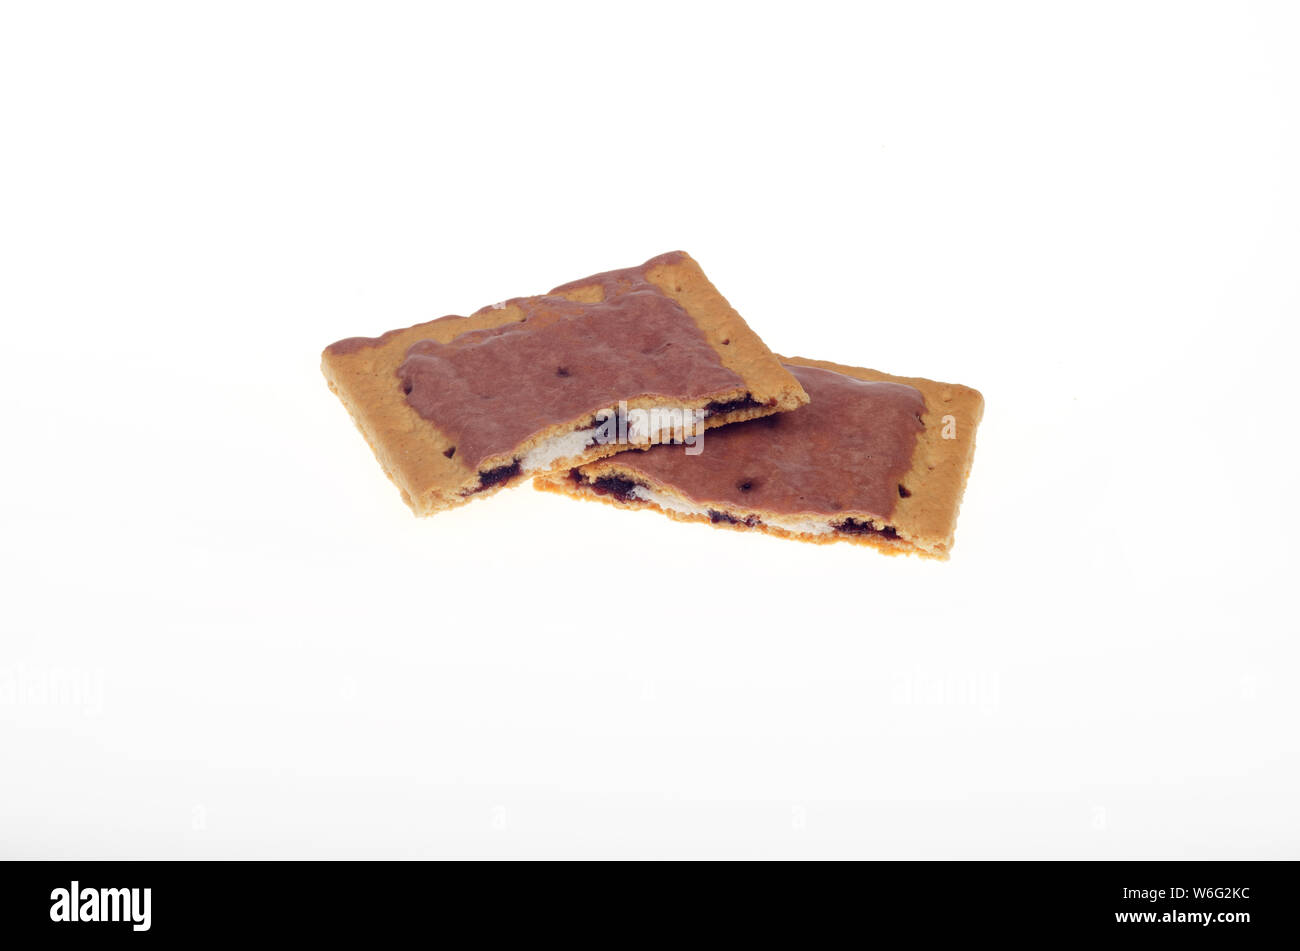 Kellogg’s Chocolate frosted S’mores Pop-Tart broken in half showing filling inside toaster pastry Stock Photo